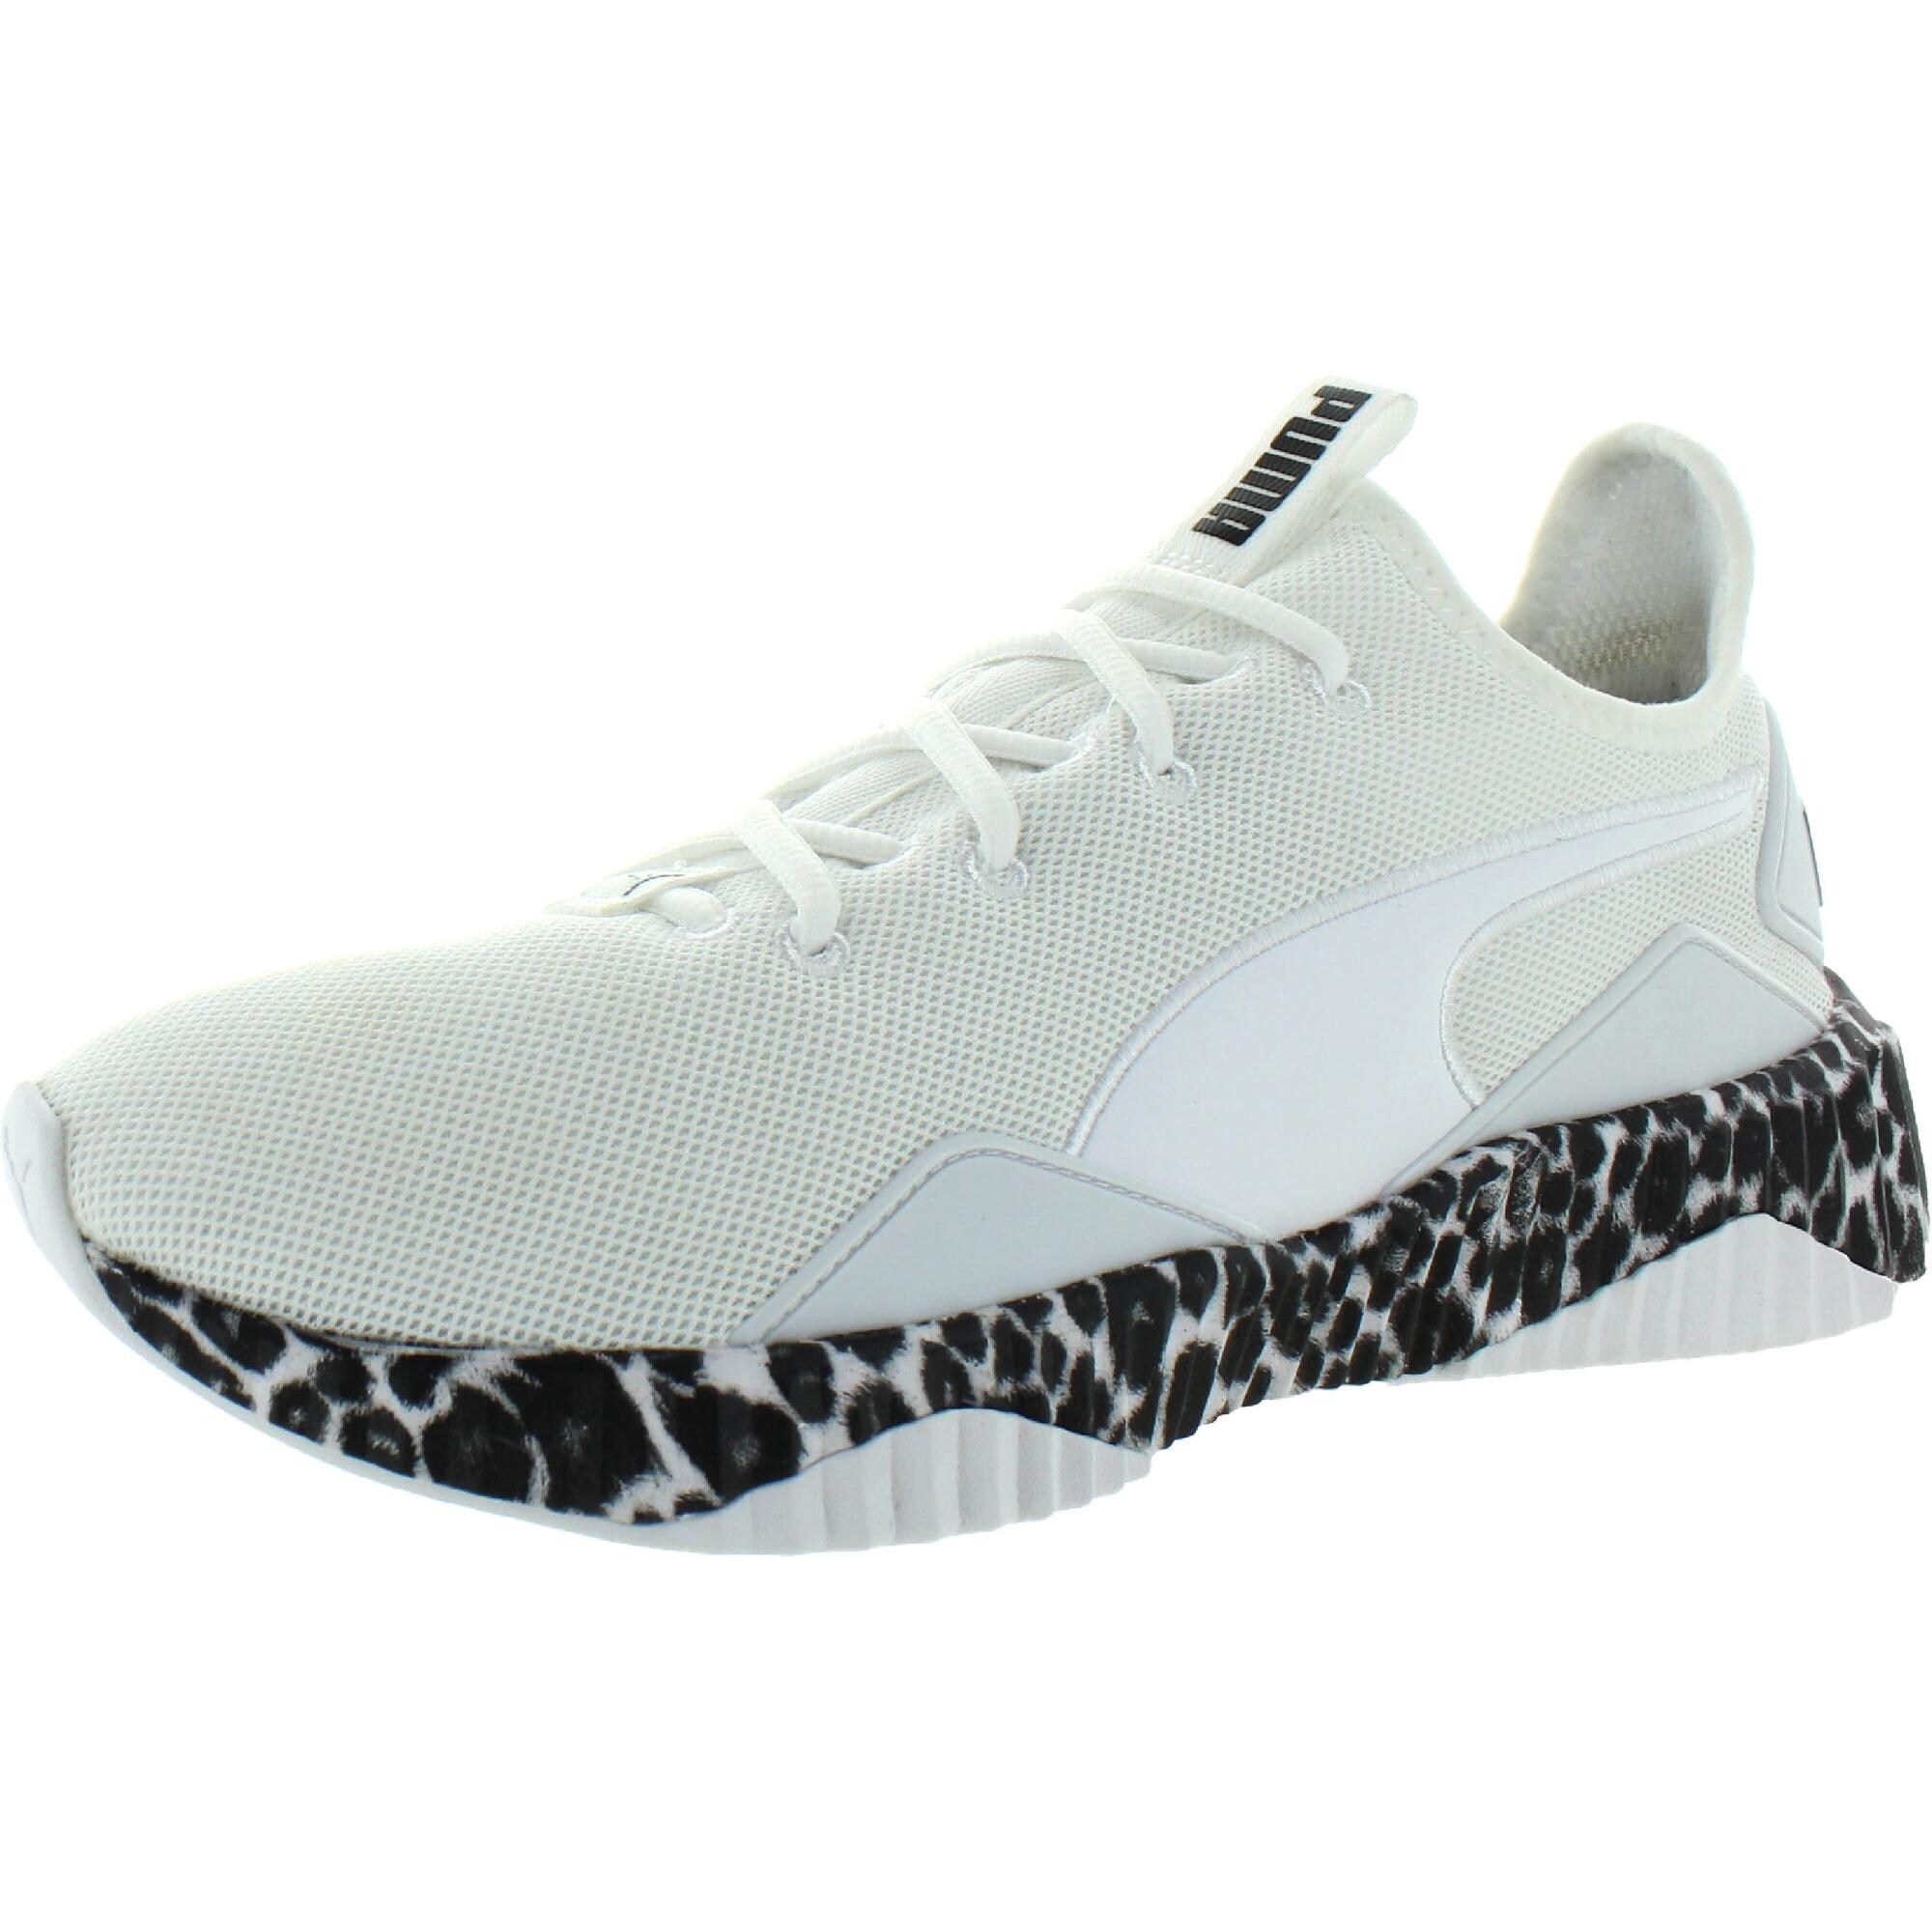 black and white leopard print slip on sneakers